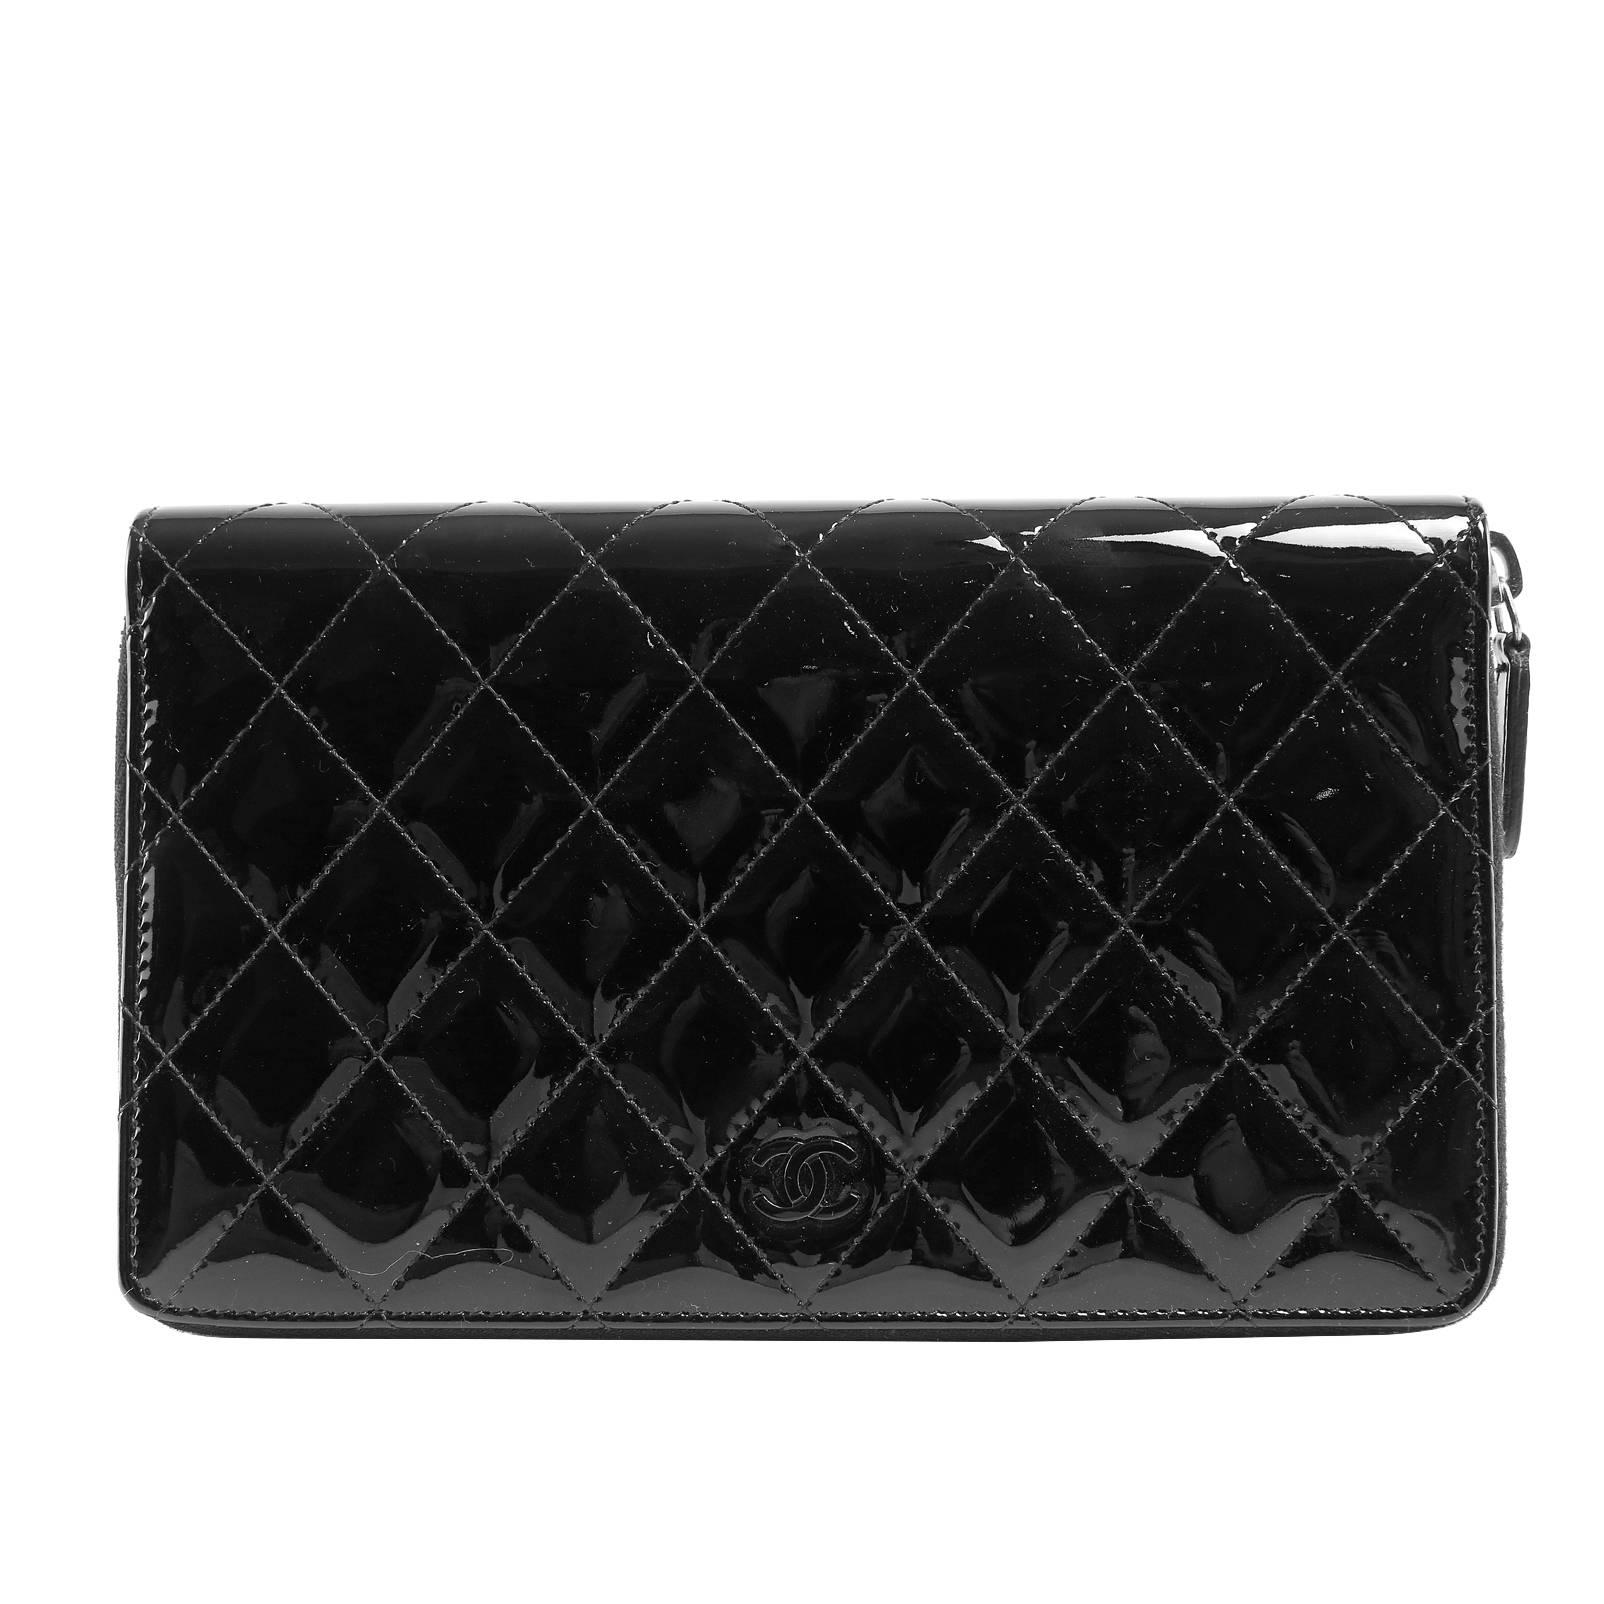 Chanel Black Patent Leather Large Zip Around Wallet